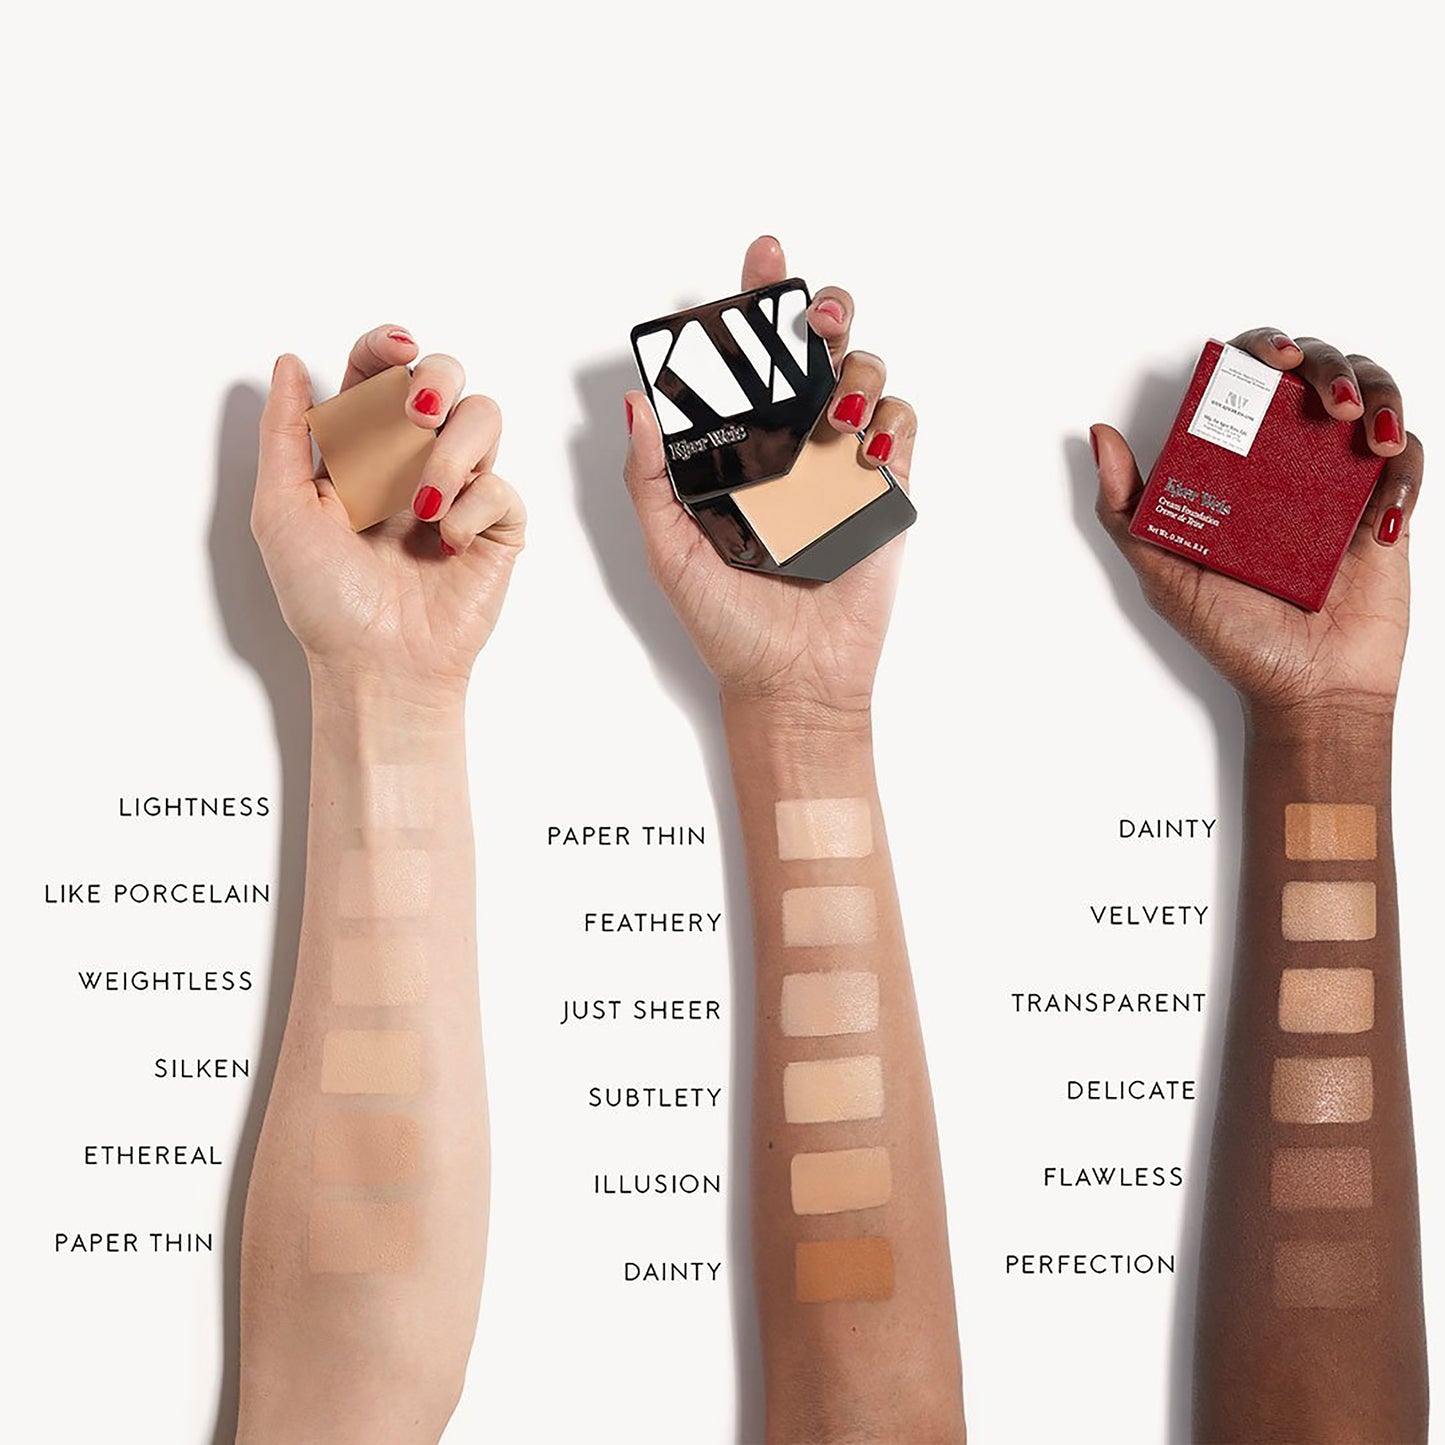 Three arms of three different skin tones all with a swatch of cream foundation from darkest to lightest shade. Silken is the third-darkest shade on the lightest skin tone.  